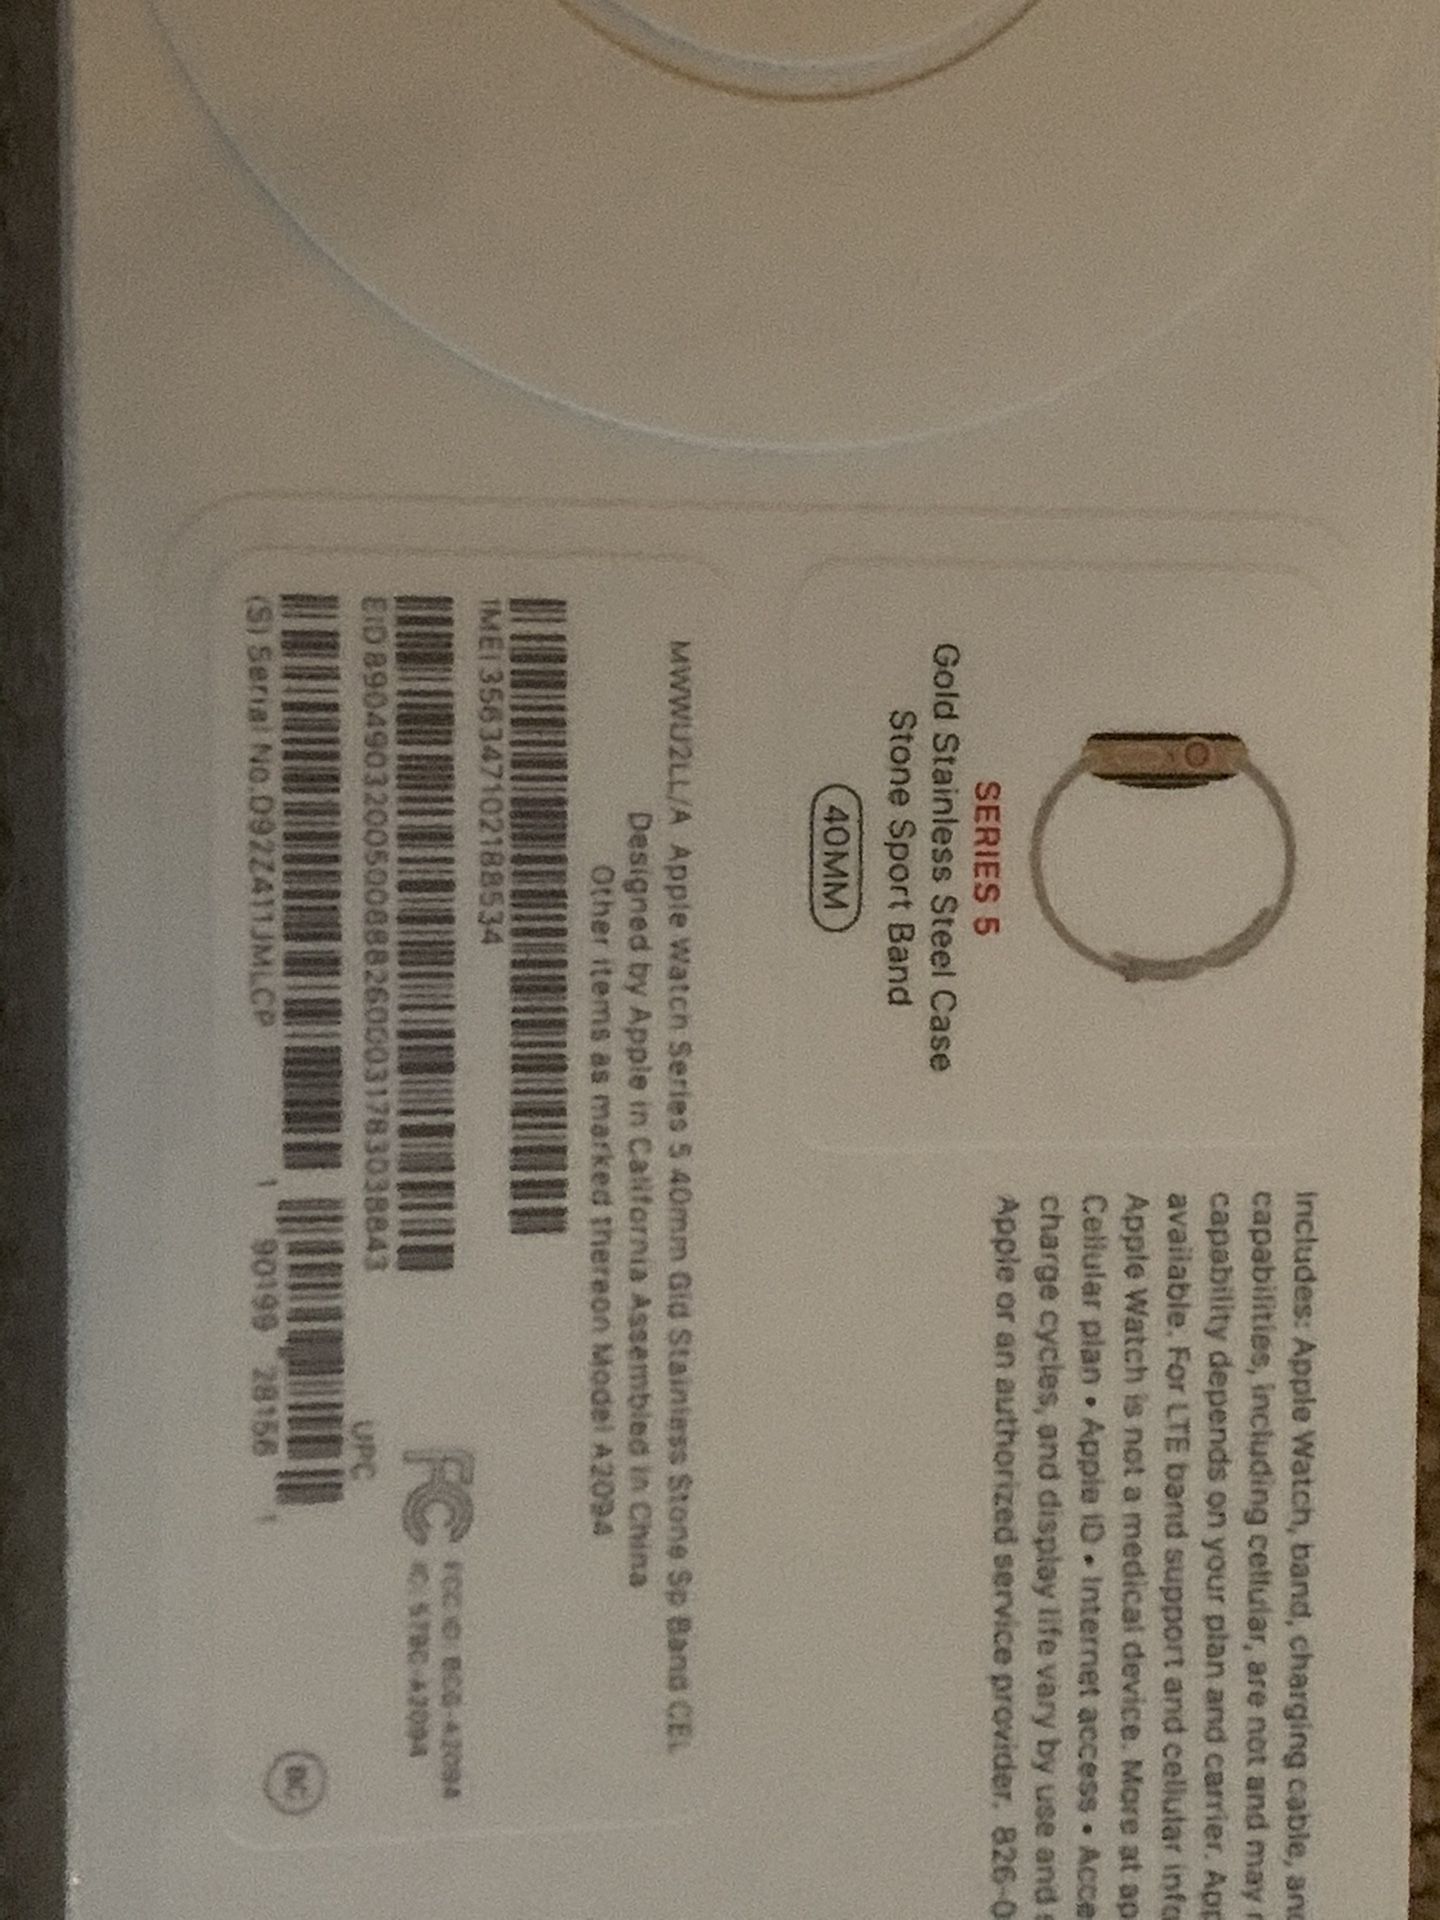 Apple Watch series 5 Gold stainless steel case stone sport band